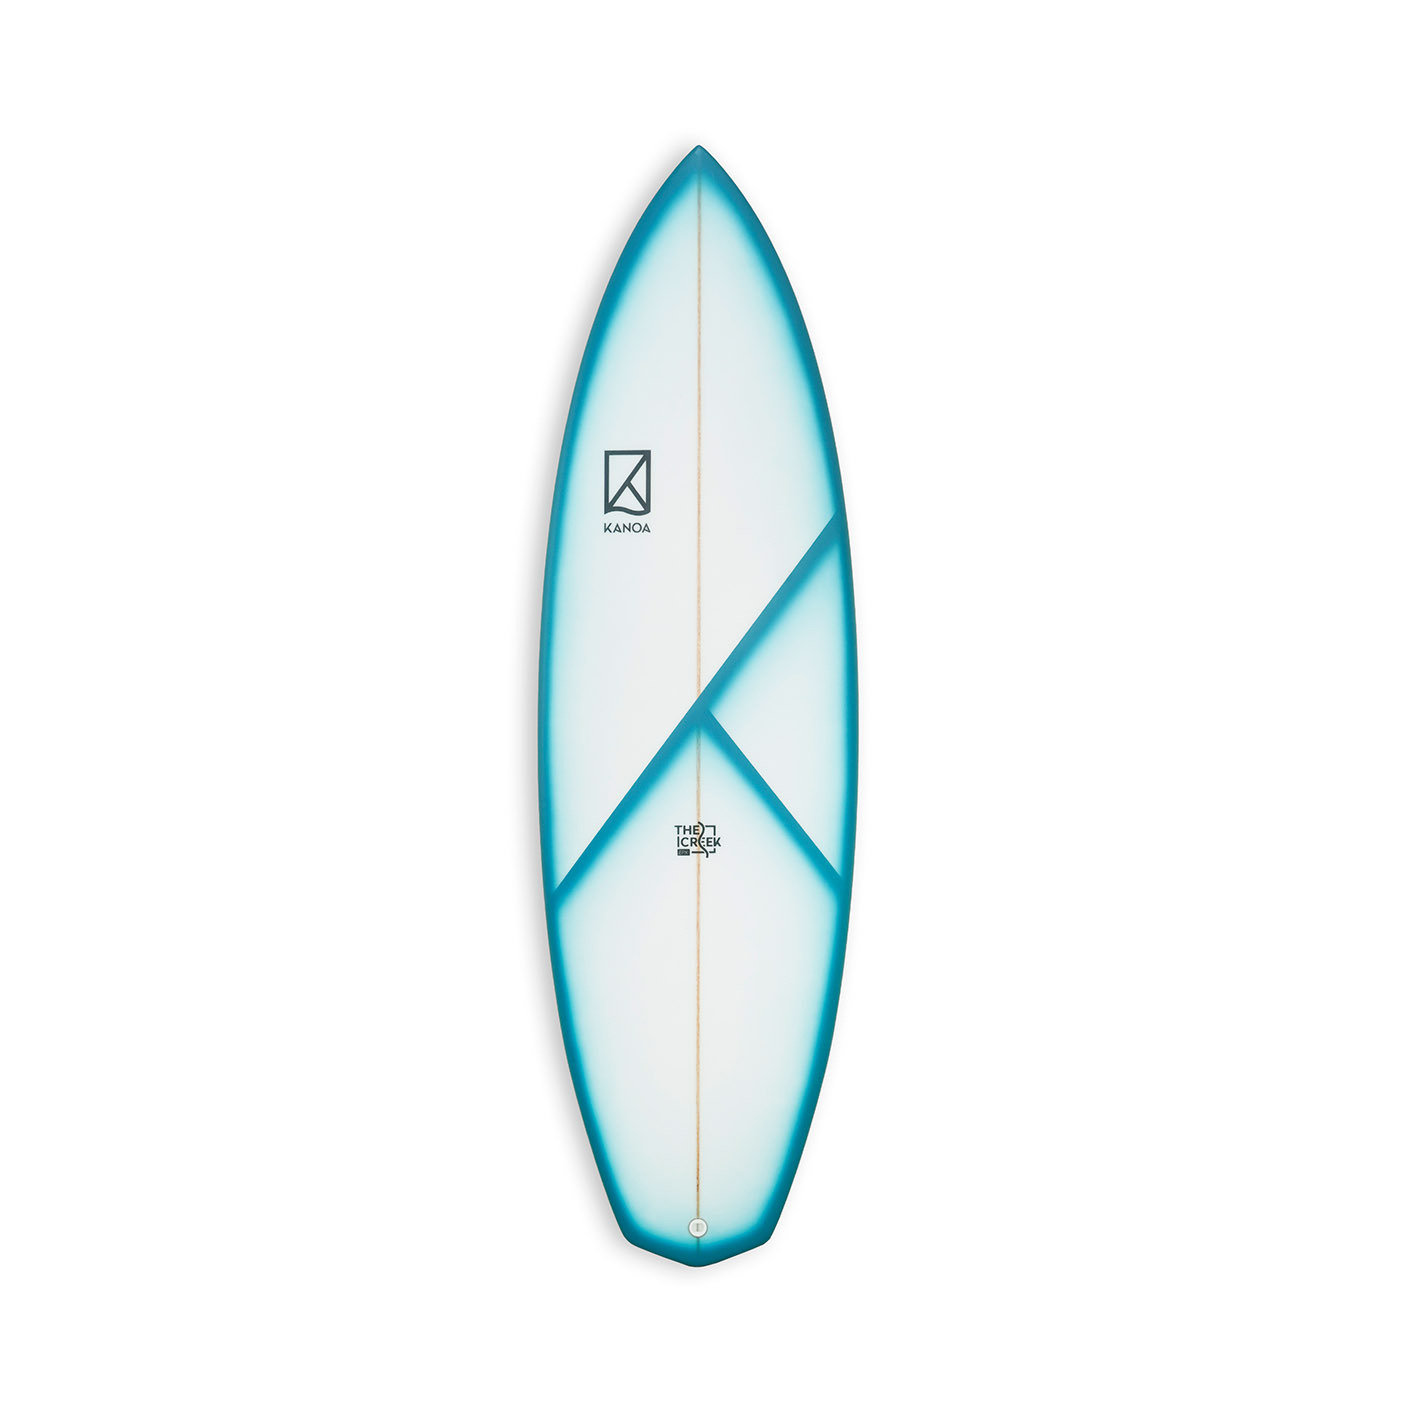 EPX River Surfboard - the Creek 